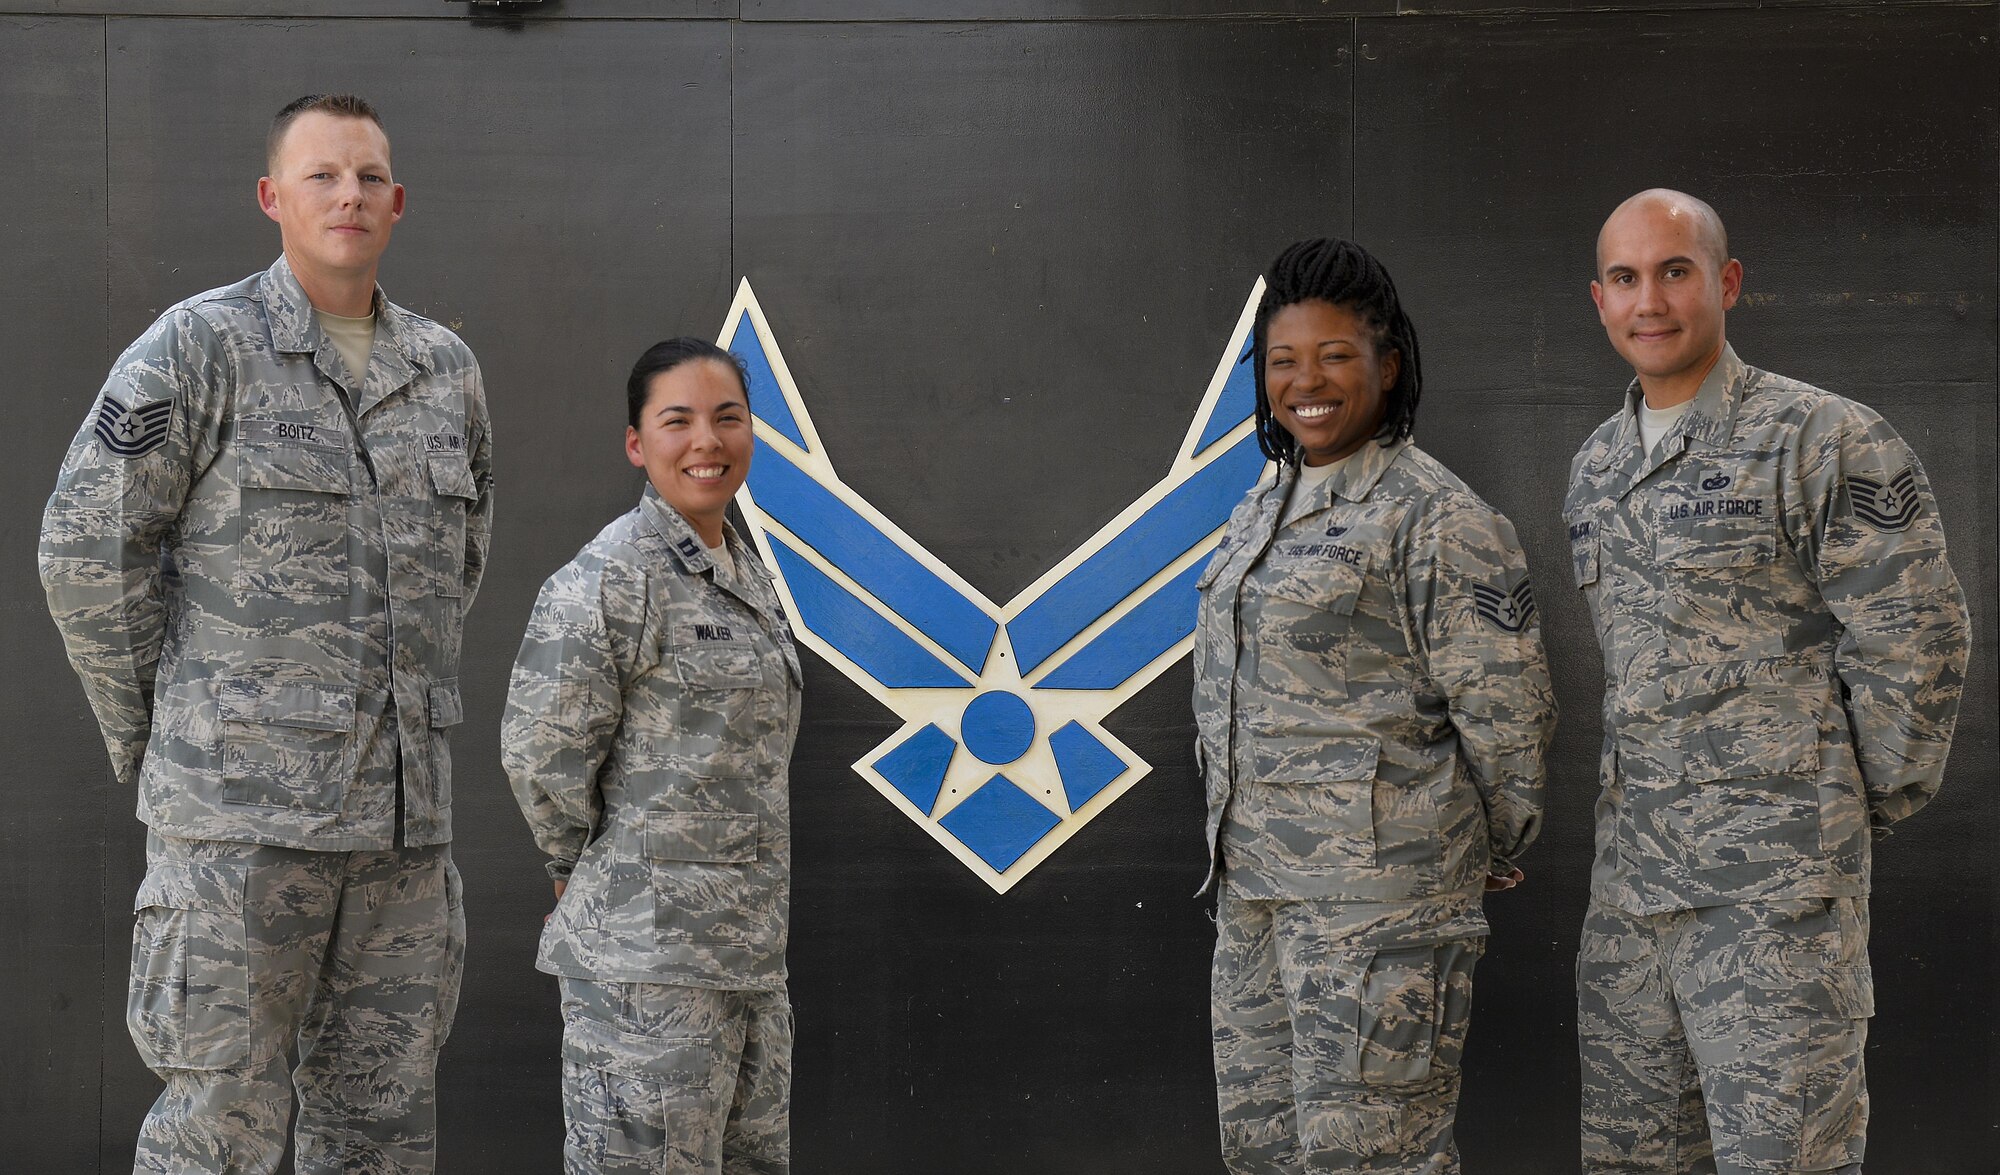 Members of the 380th Air Expeditionary Wing Public Affairs pose for a group photo at an undisclosed location in Southwest Asia, Aug. 6, 2015. The primary mission of PA is to inform the general public of the Air Force’s story.(Courtesy photo)